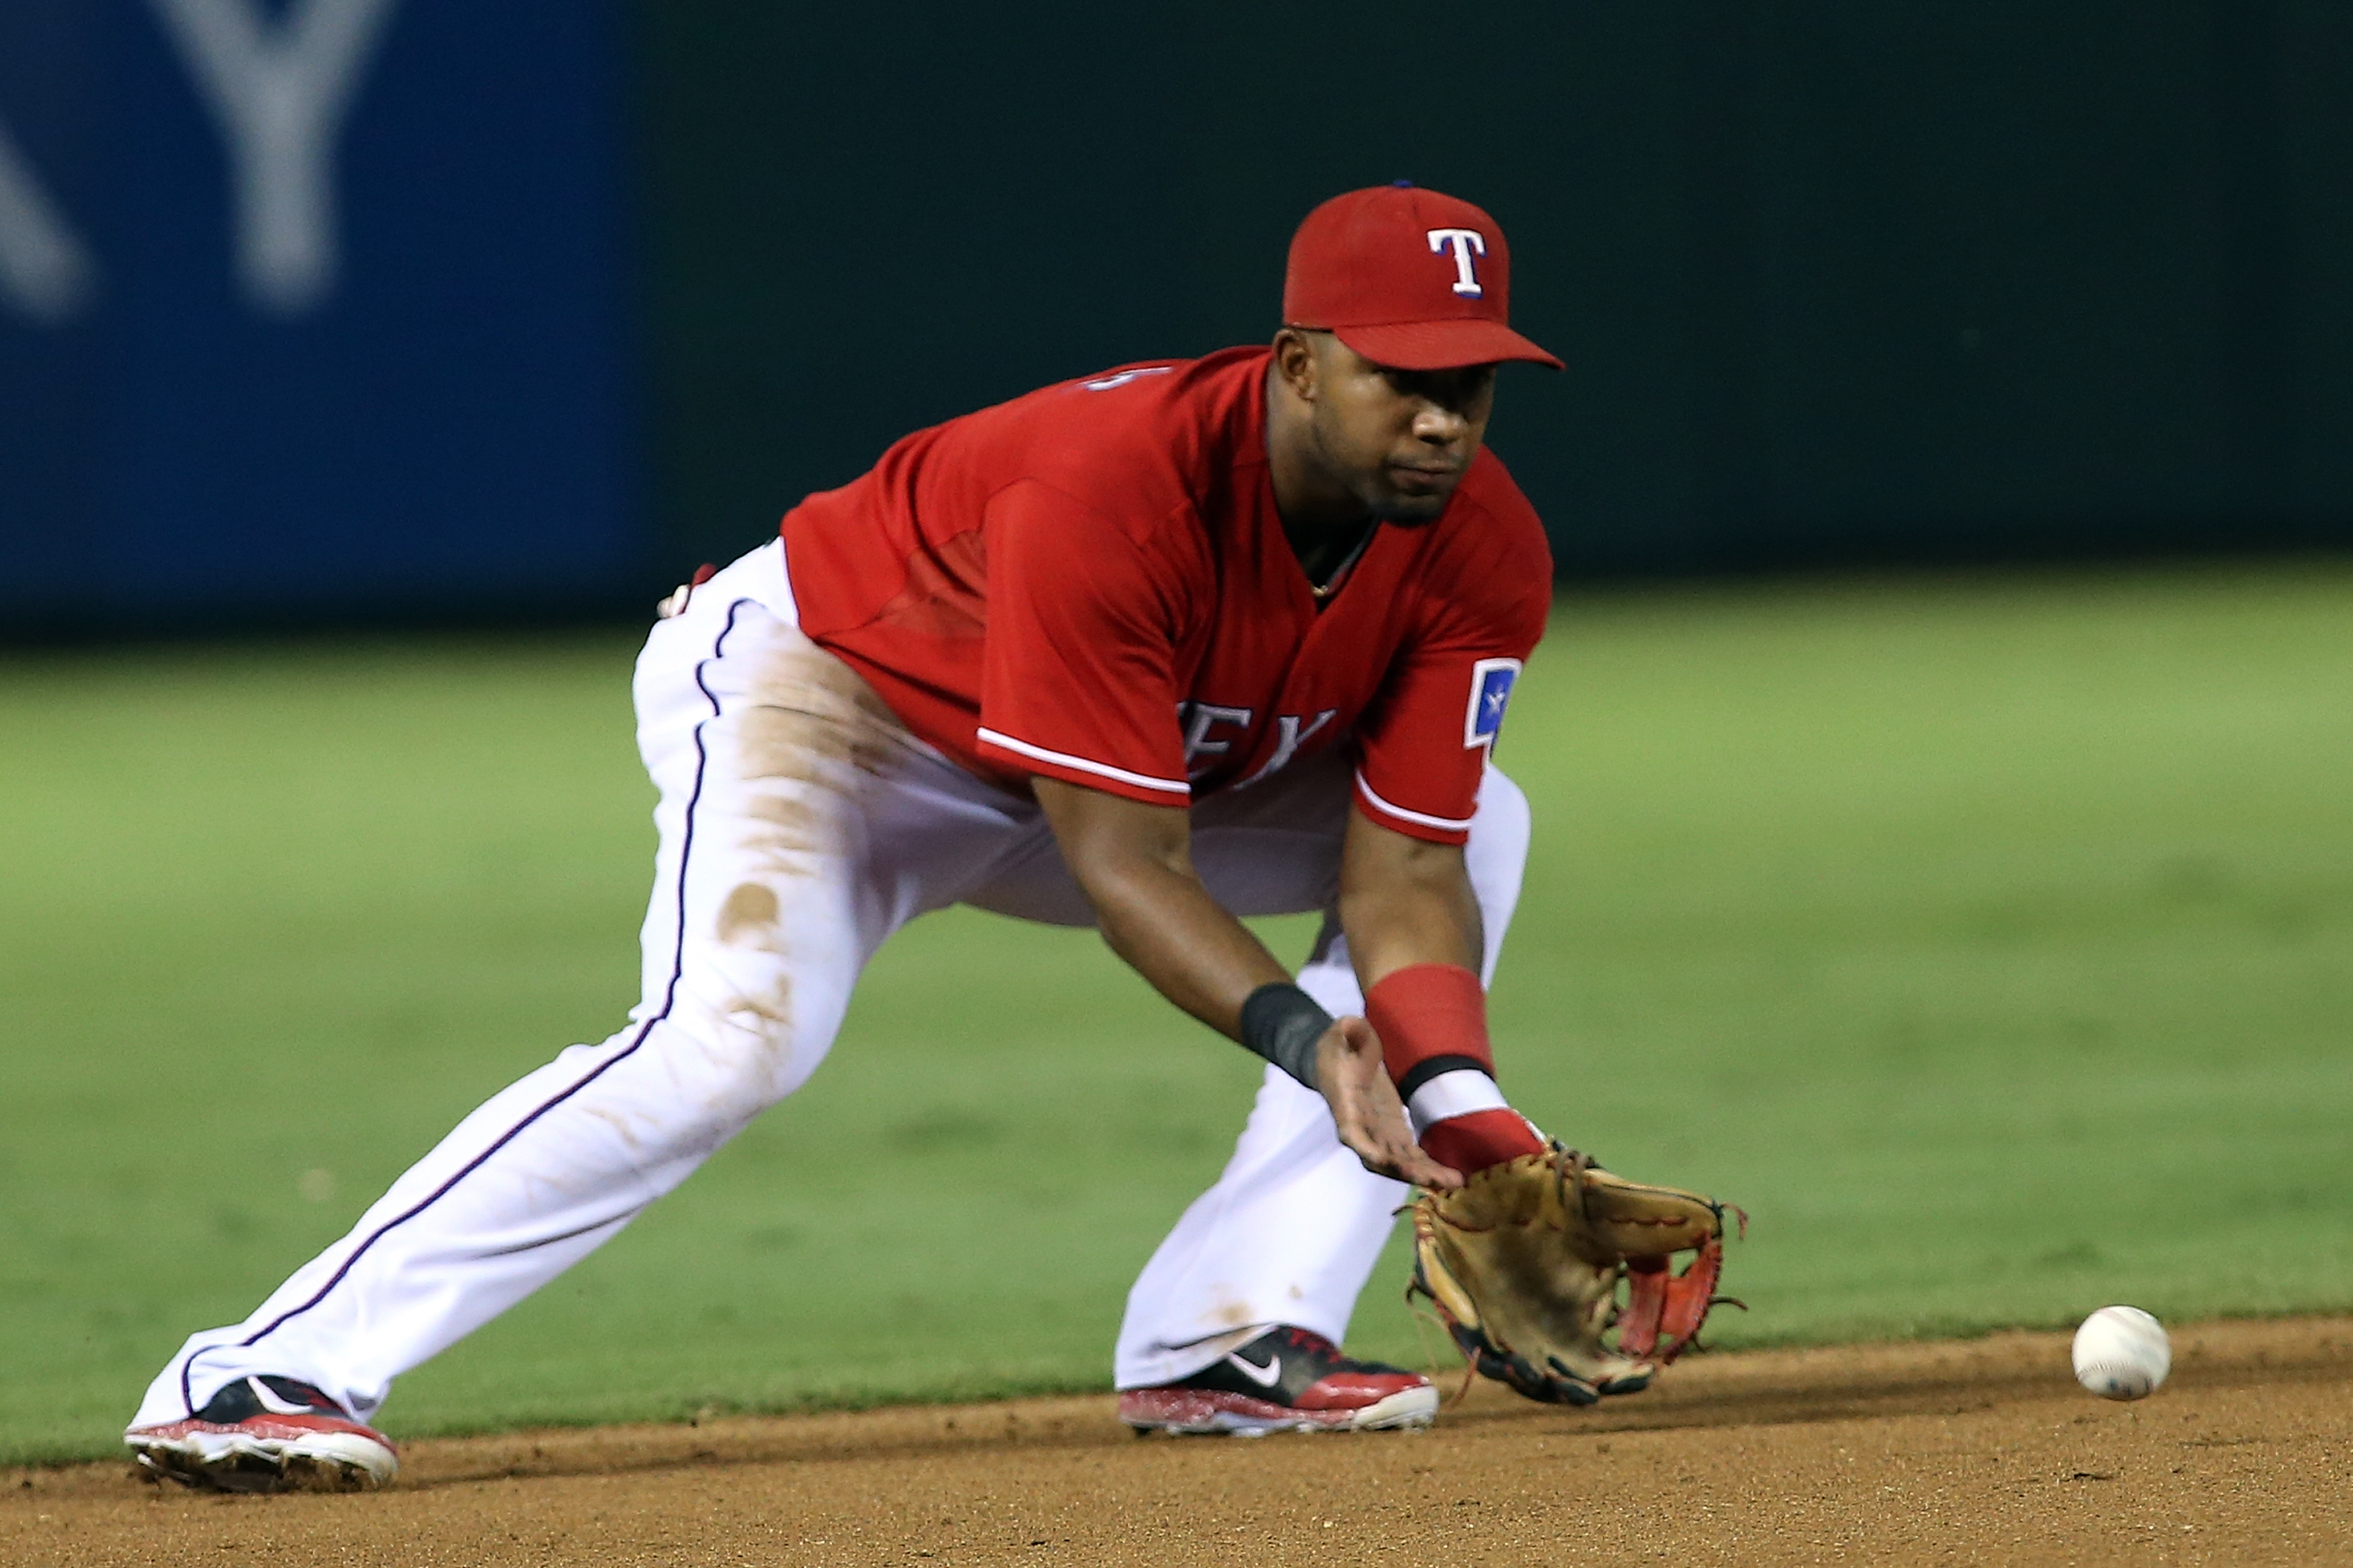 Elvis Andrus - MLB Second base - News, Stats, Bio and more - The